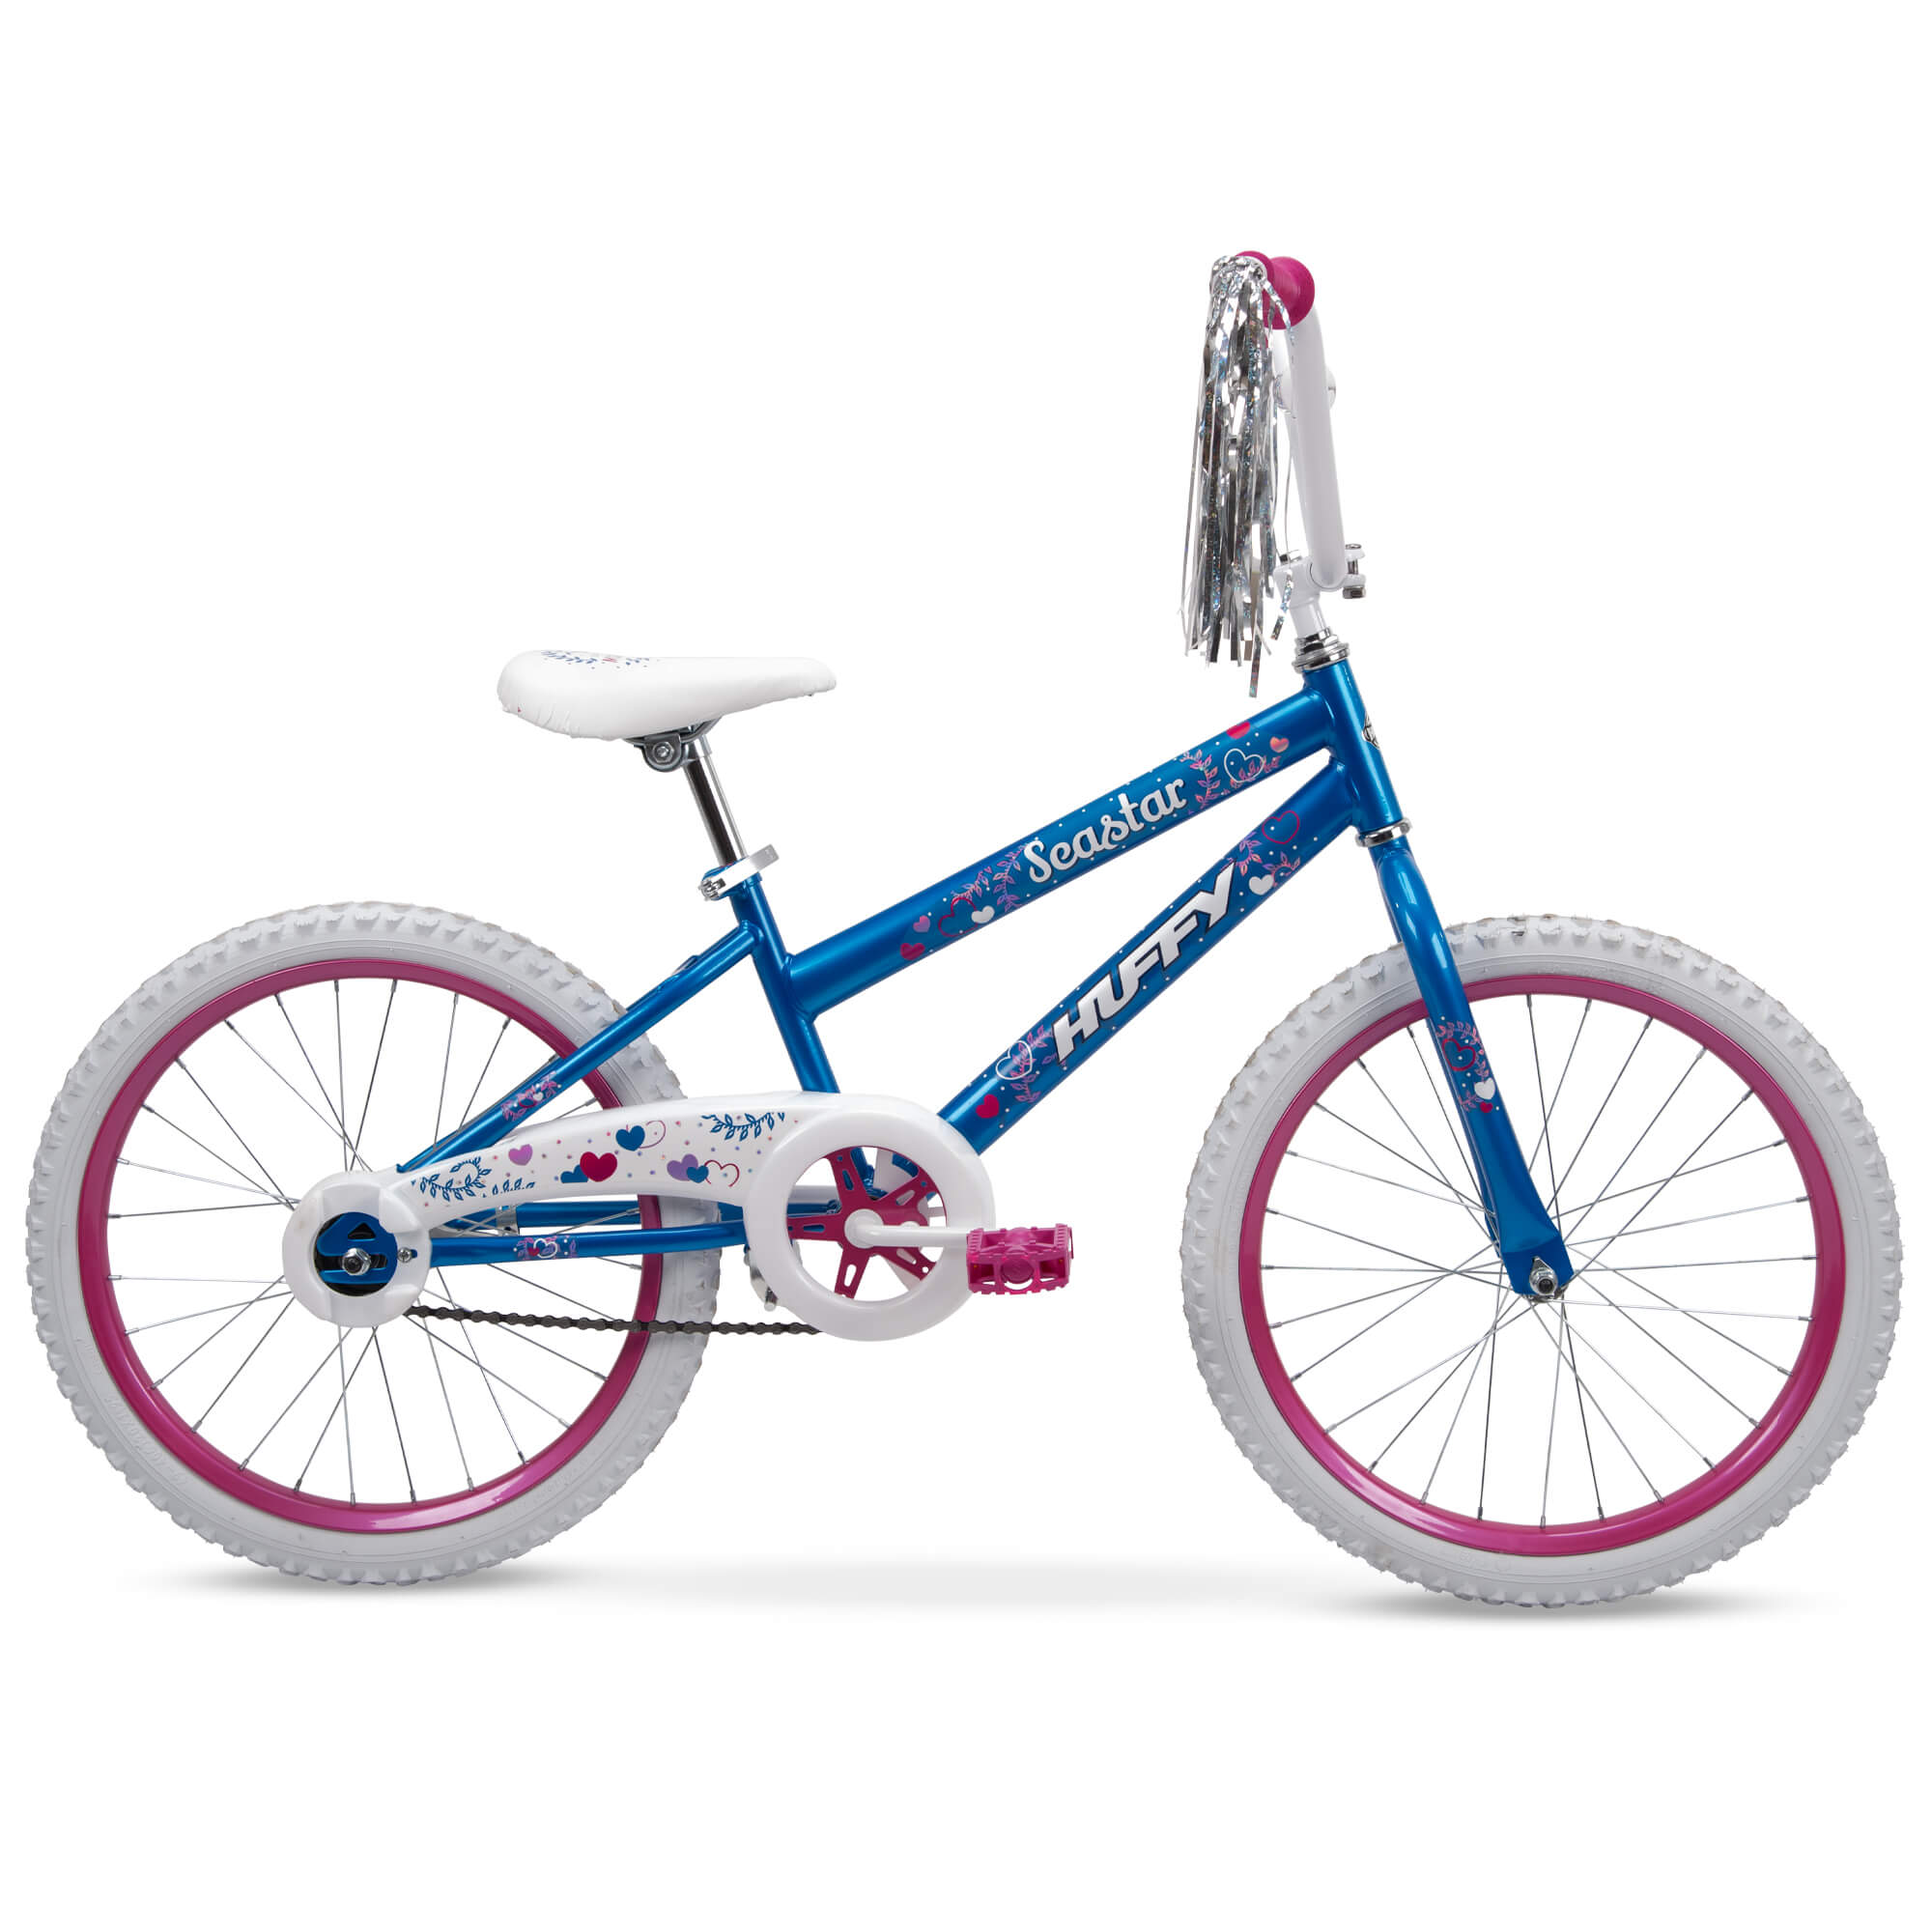 Huffy 20 in. Sea Star Kids Bike for Girls Ages 5 and up, Child, Blue and Pink - image 1 of 10